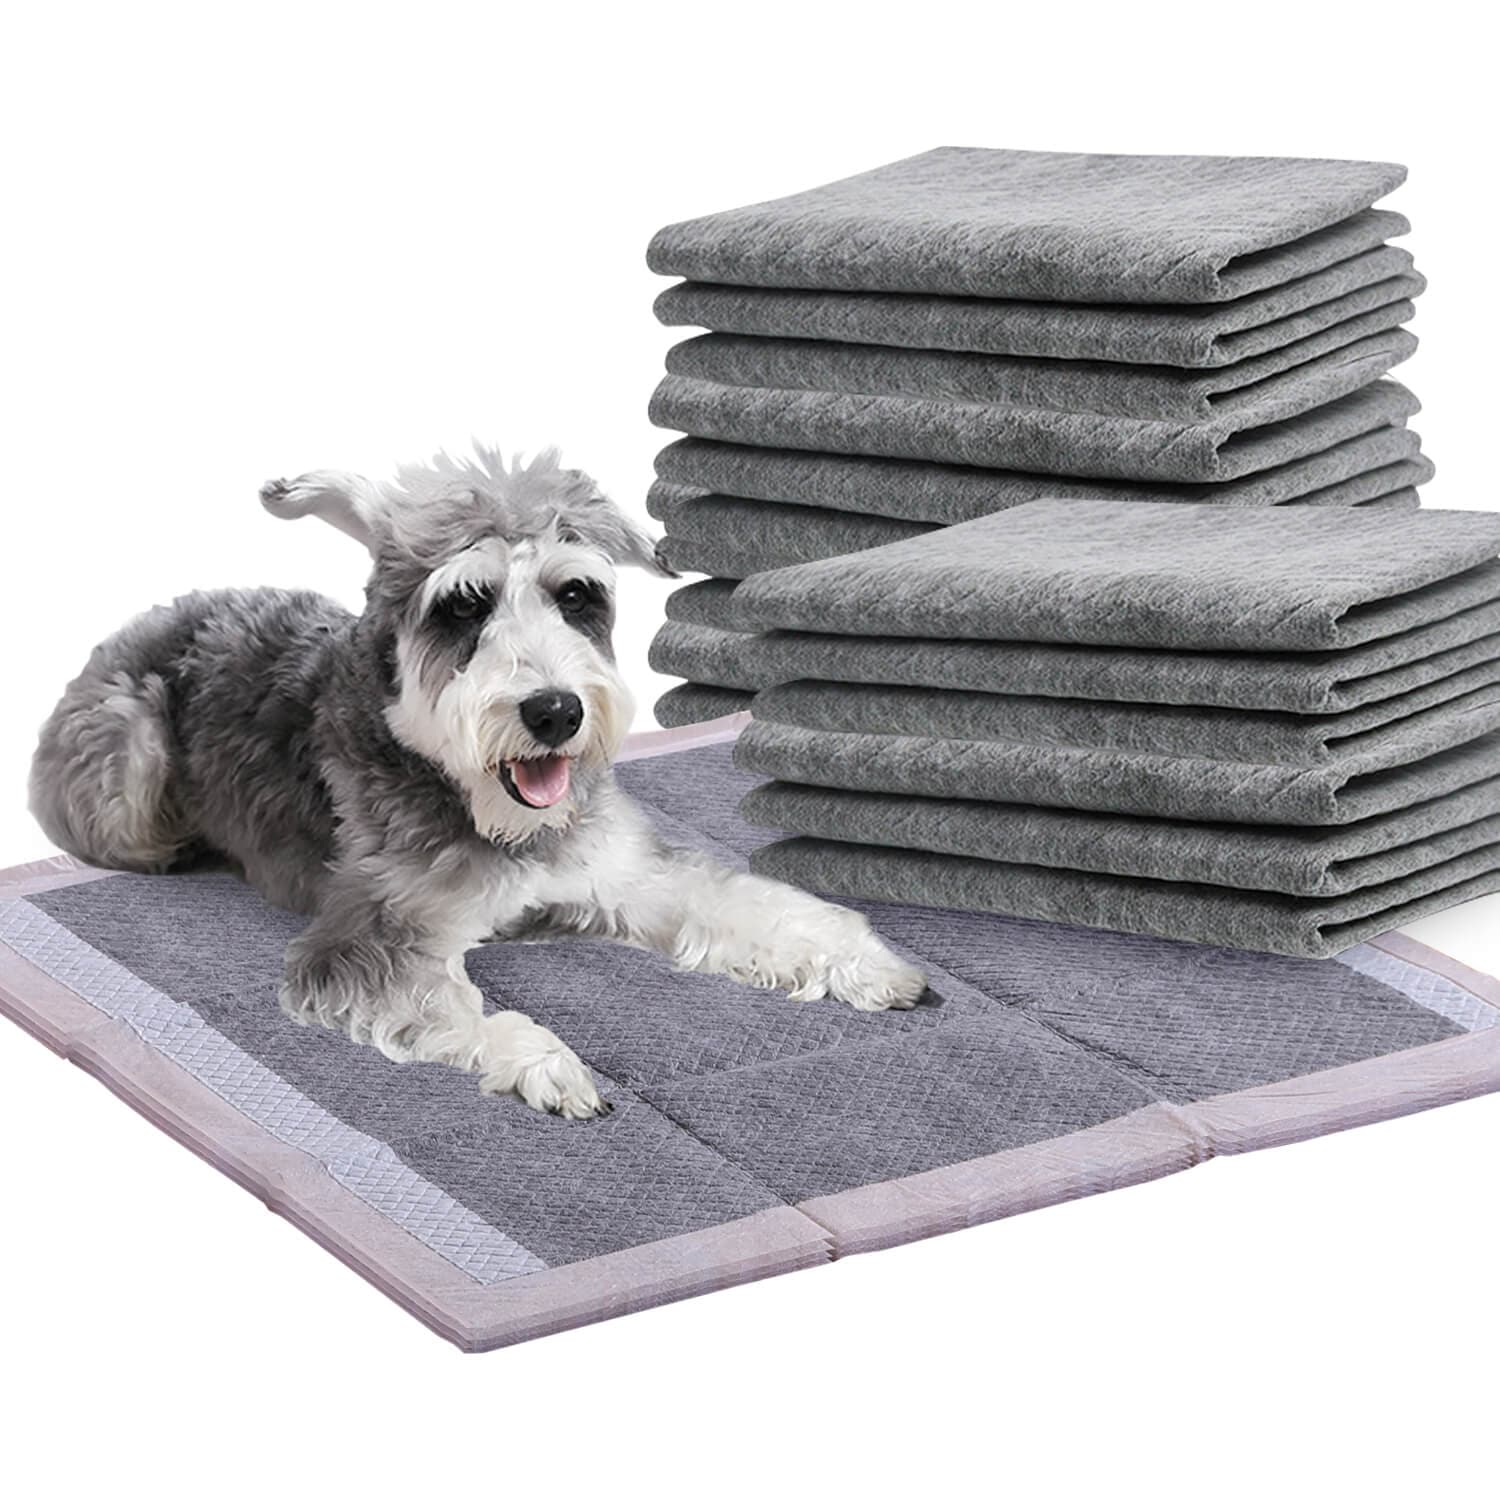 pet products 100 Pcs 60x60cm Charcoal Pet Puppy Dog Toilet Training Pads Ultra Absorbent